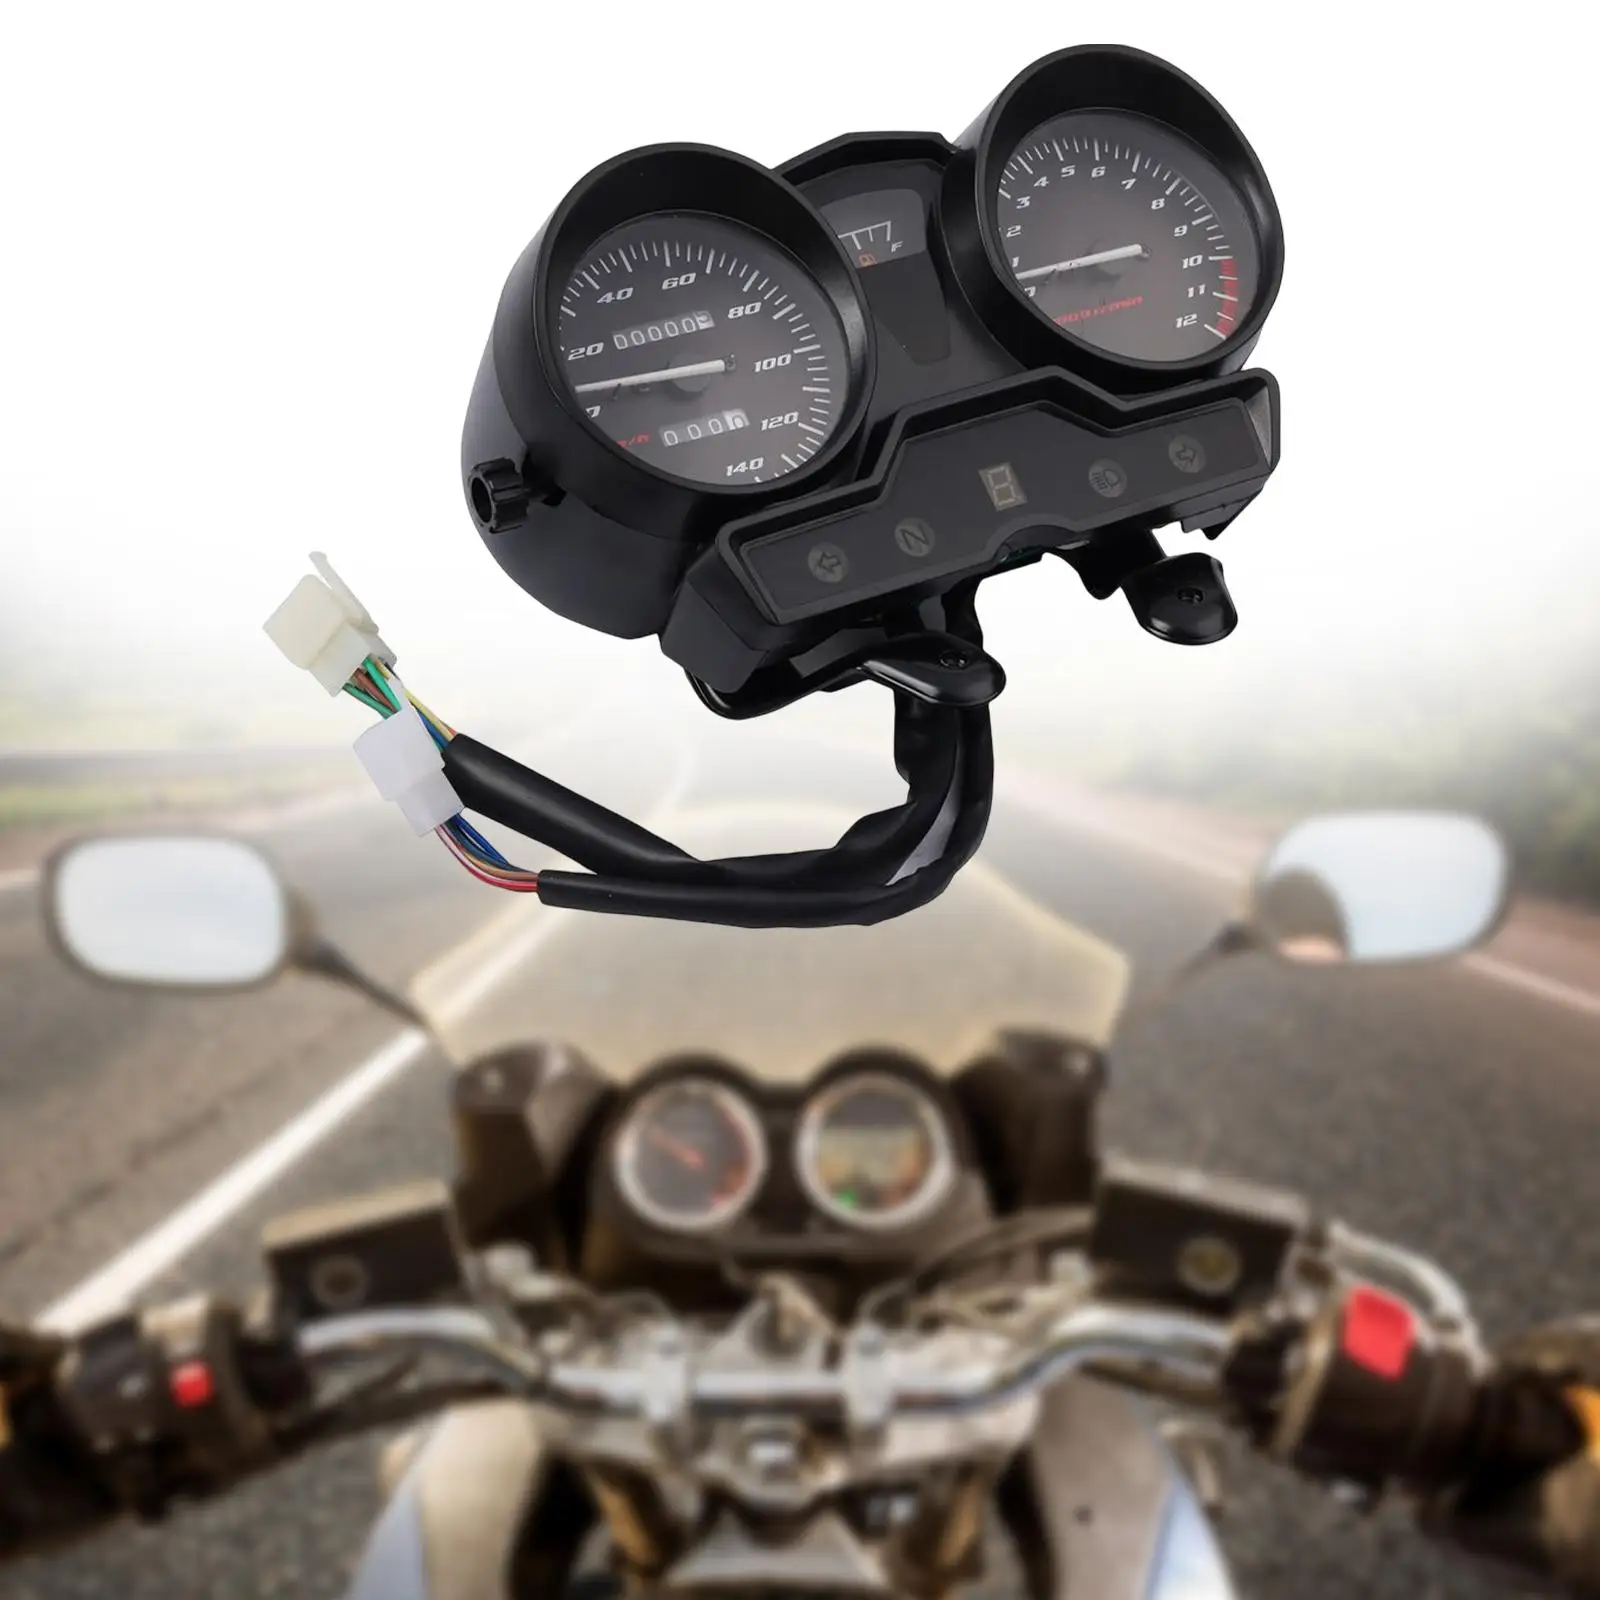 LED Digital Dashboard Motorcycle RPM Meter with Gear Display Replaces High performance Parts Easy to Install Premium